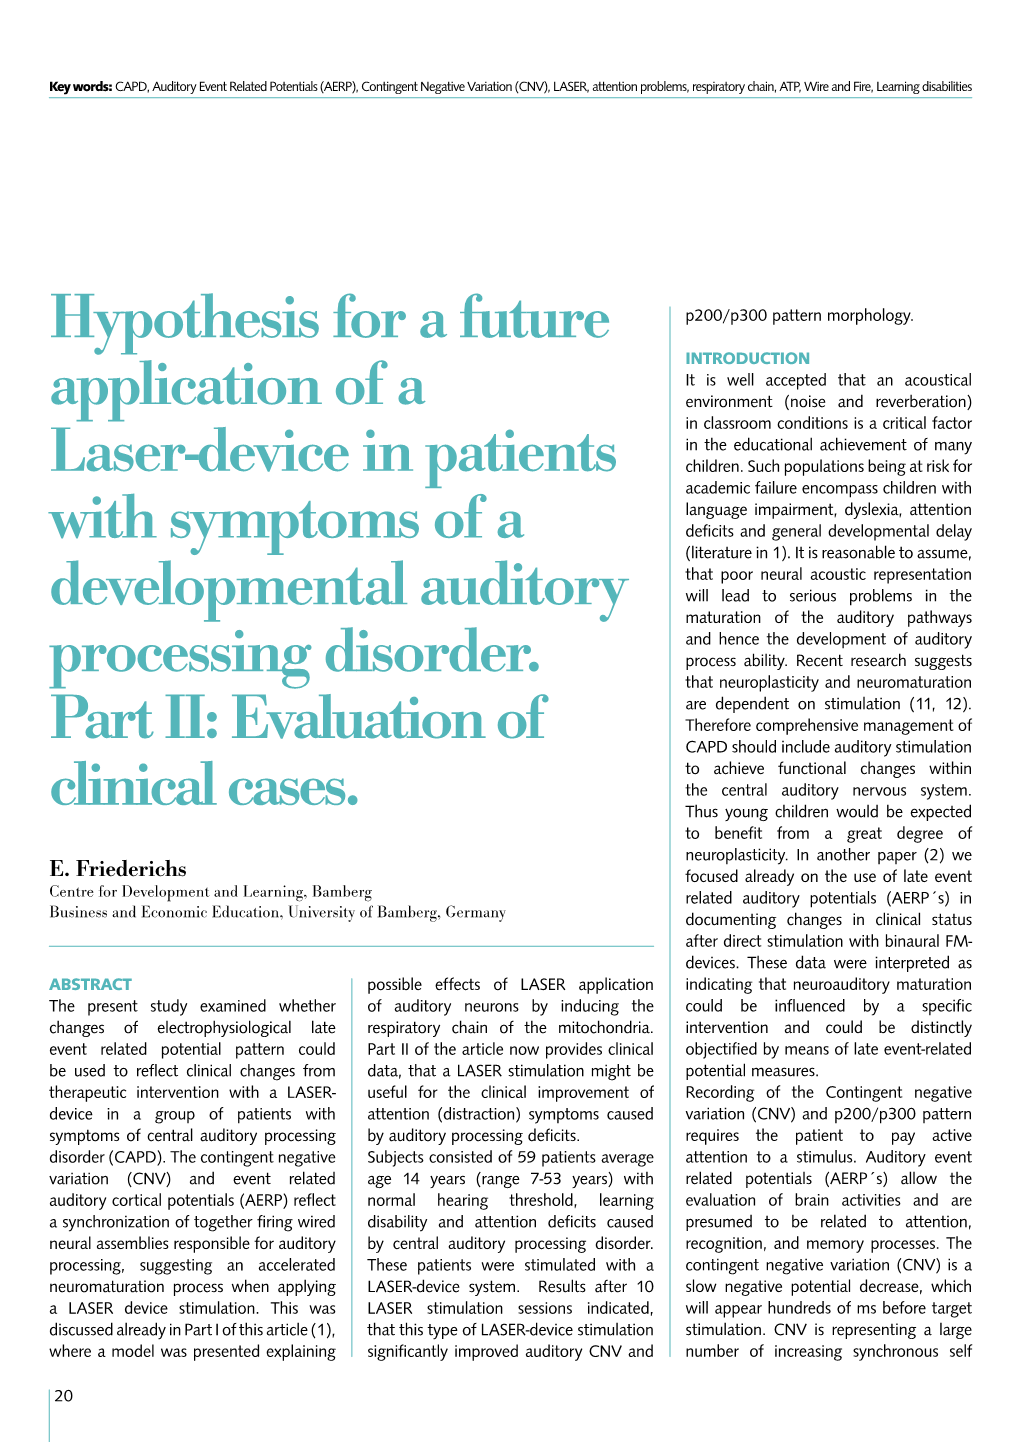 Hypothesis for a Future Application of a Laser-Device in Patients with Symptoms of a Developmental Auditory Processing Disorder